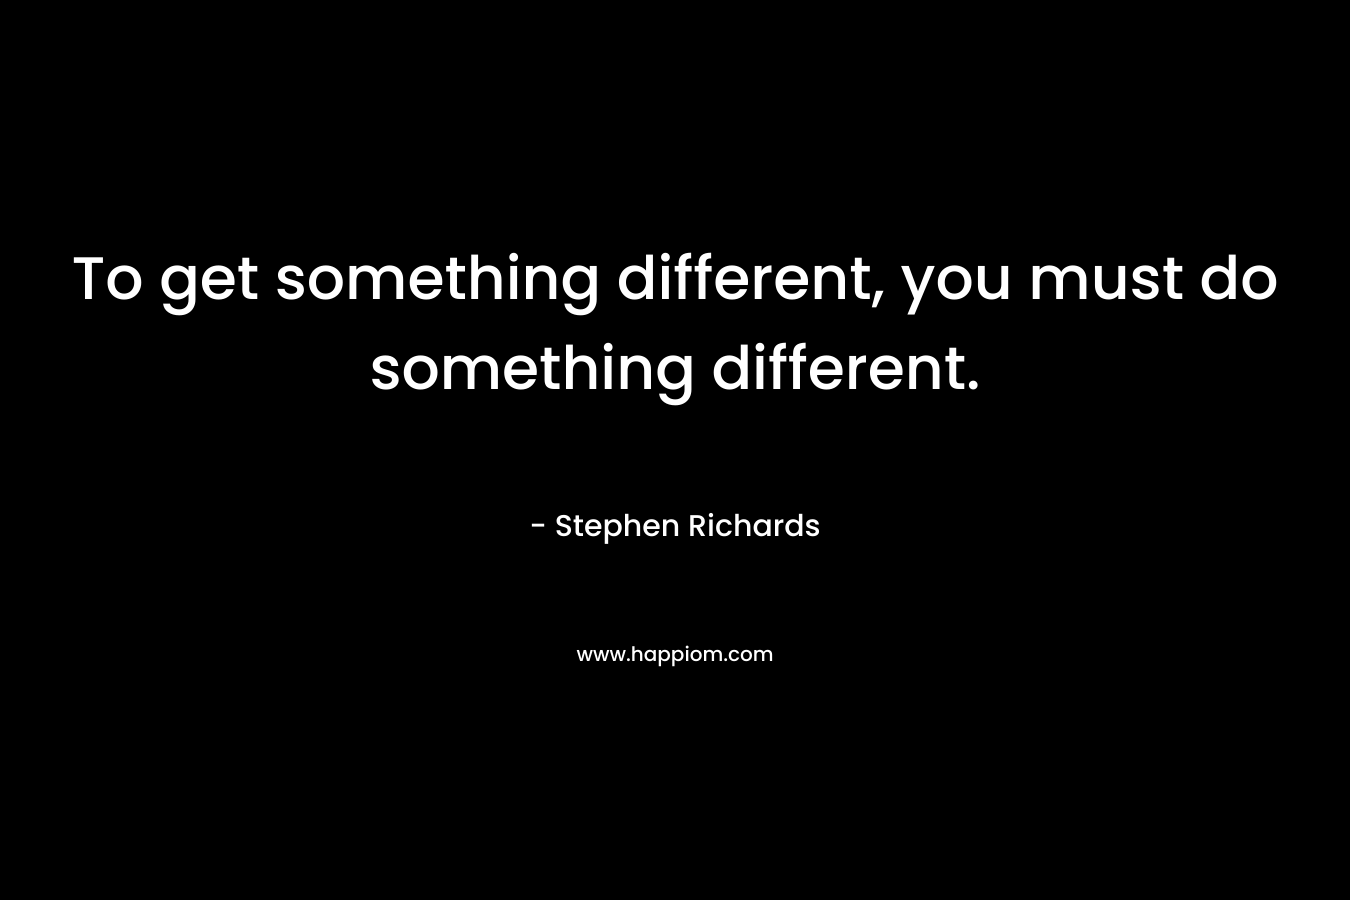 To get something different, you must do something different.